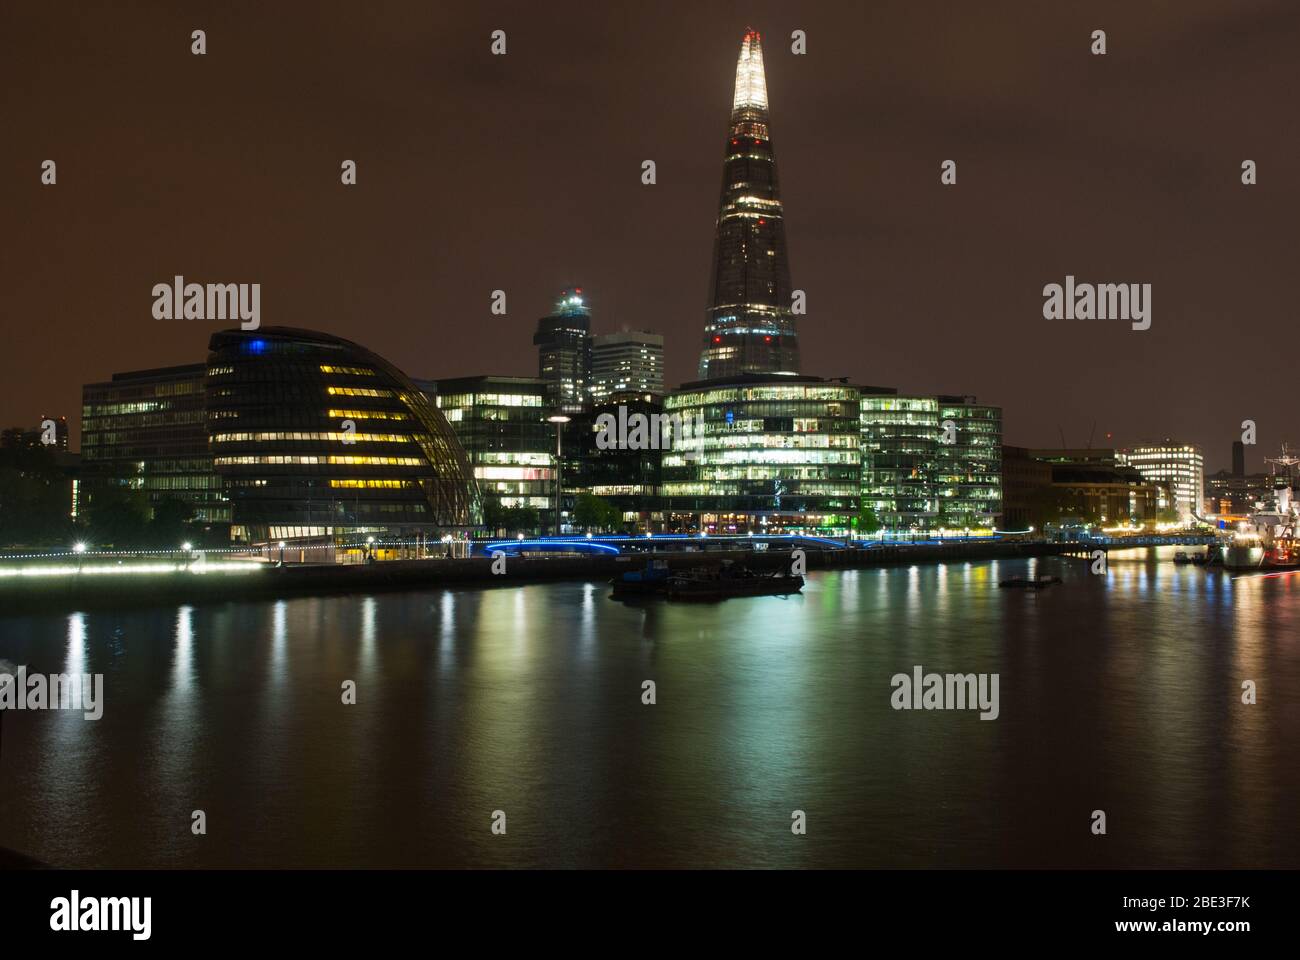 Evening Night Lights Riverside The Shard More London Place, Riverside, London, SE1 2AF by Foster & Partners Arup Stock Photo